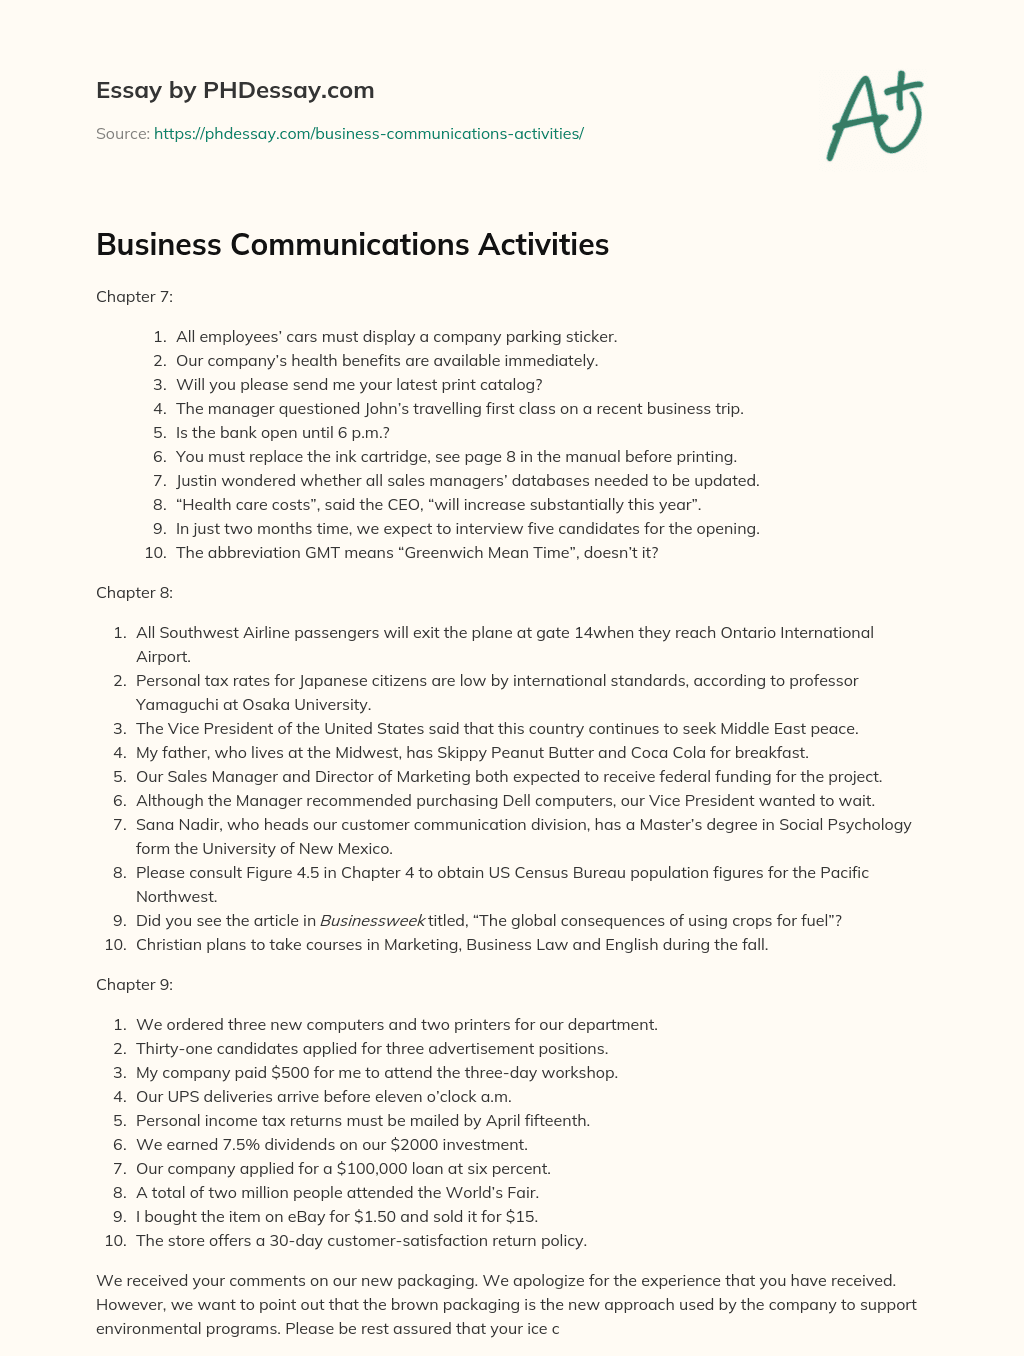 essay about business communications